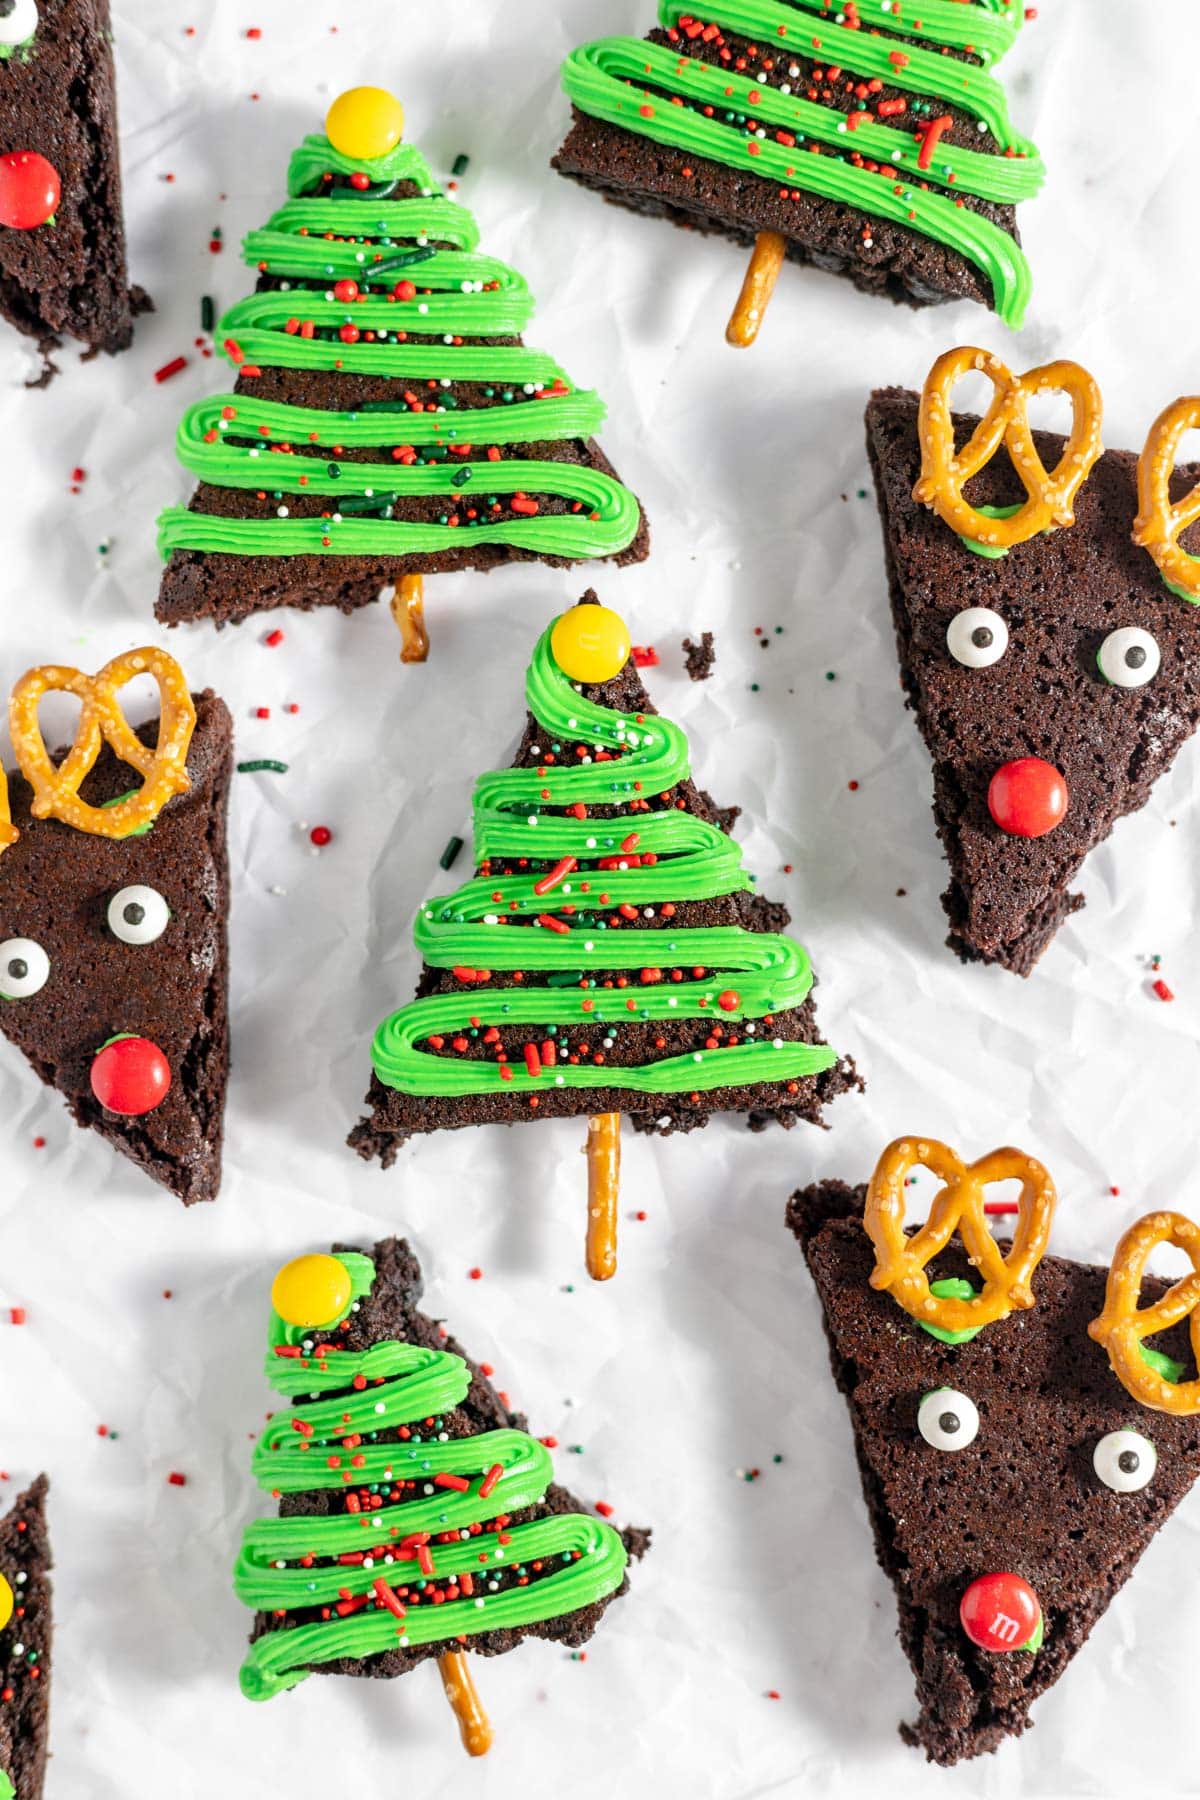 Christmas brownies in the shape of triangles and decorated like Christmas trees and reindeer with green frosting, candy eyes, M&Ms and pretzels.